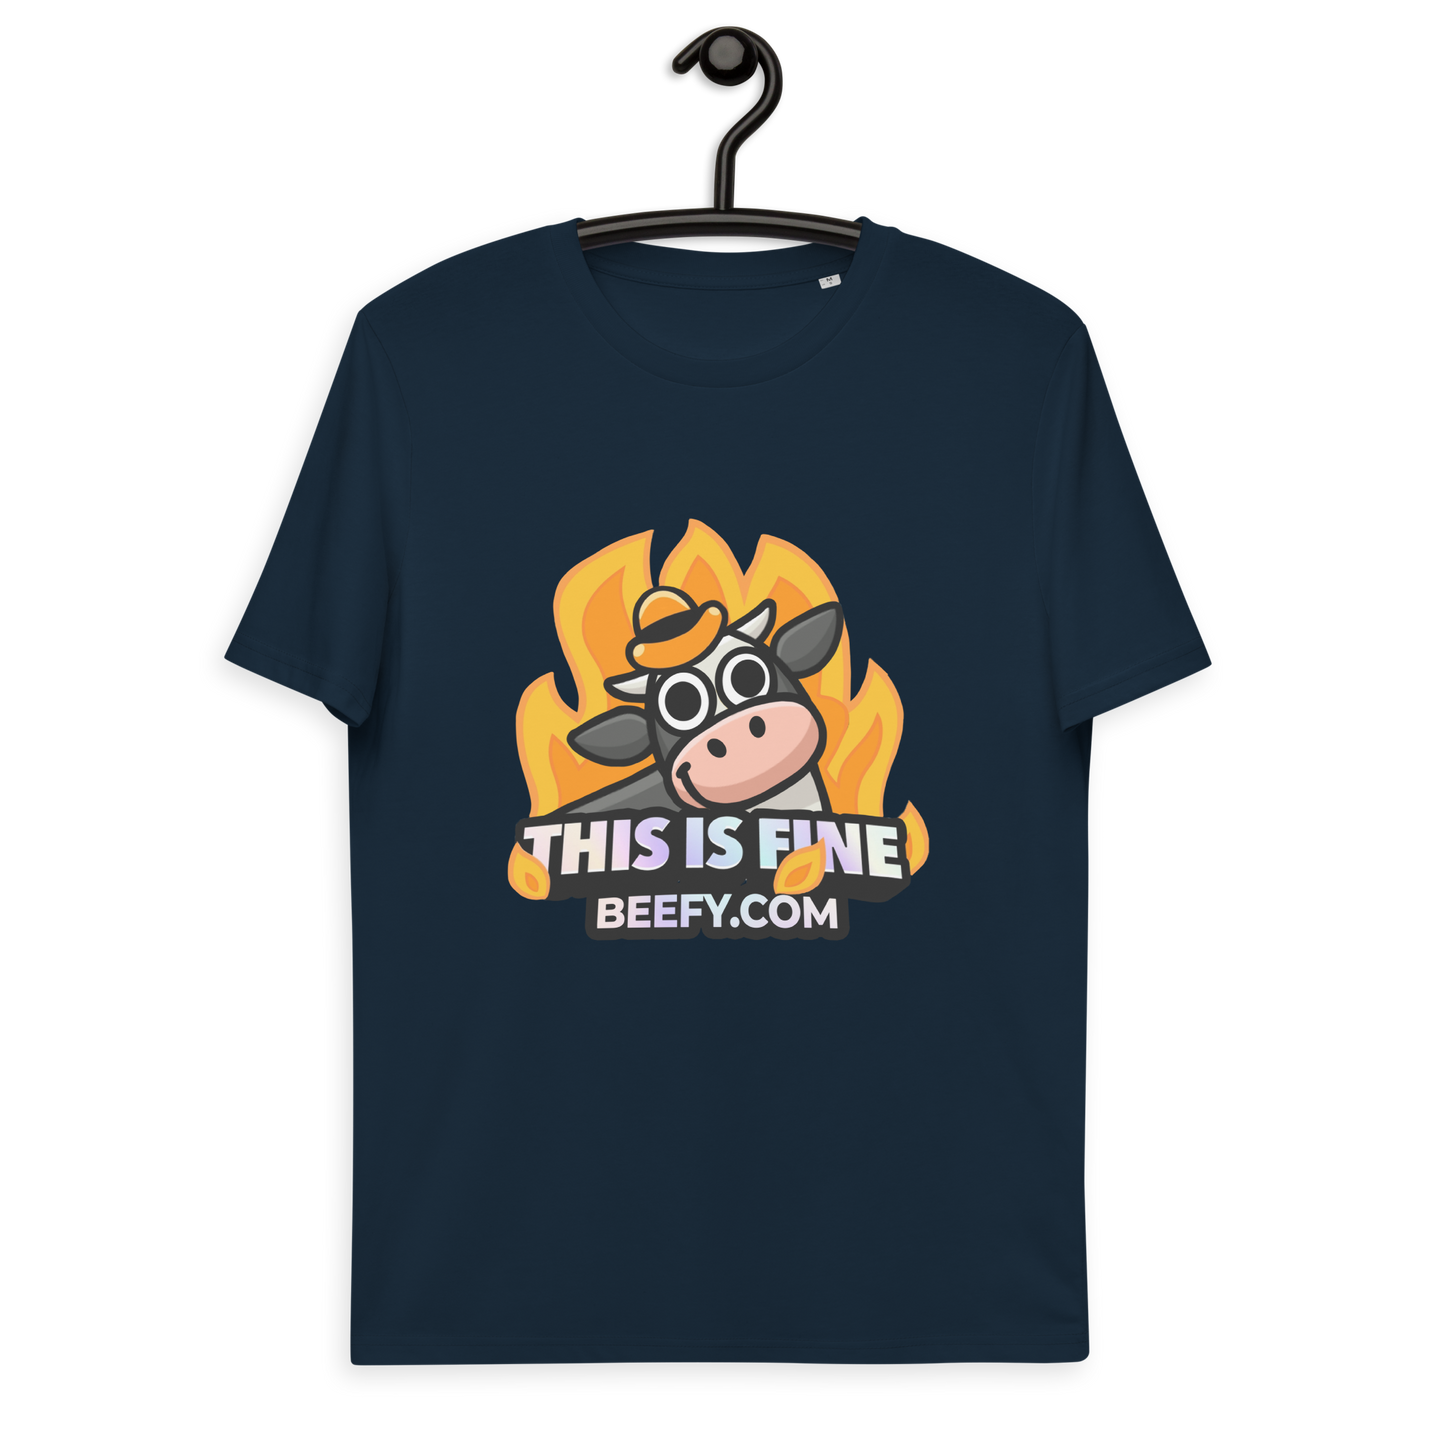 This is fine t-shirt